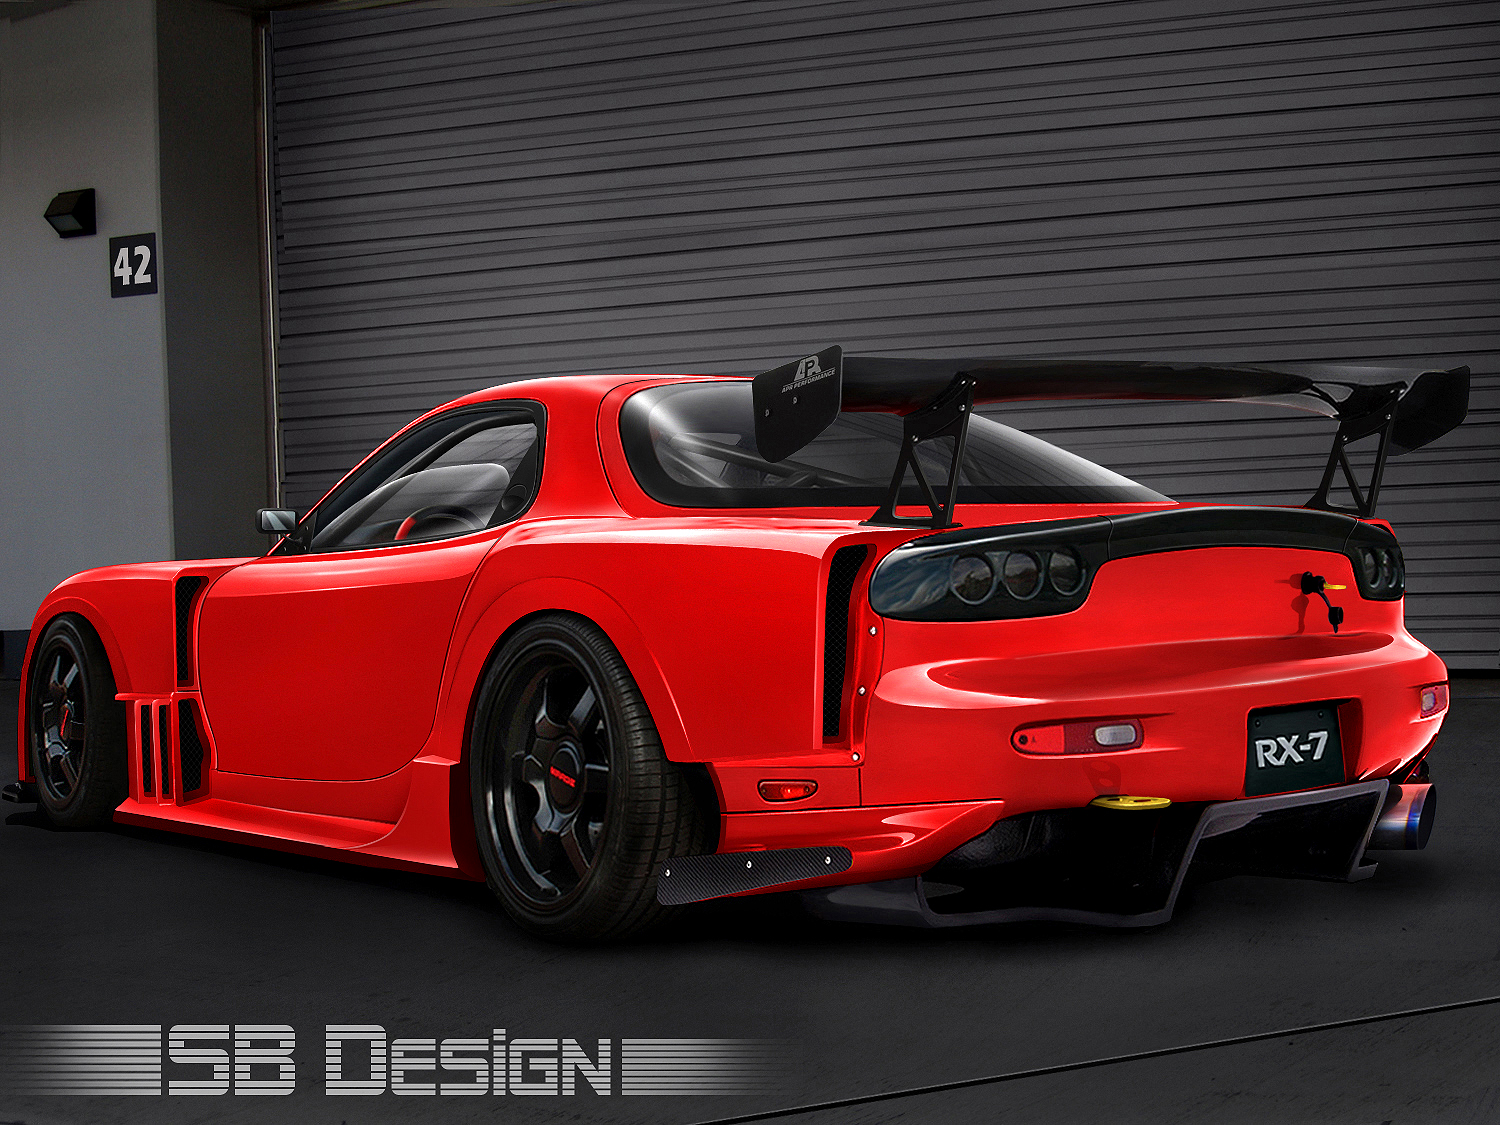 HQ Mazda RX-73 Wallpapers | File 1214.16Kb